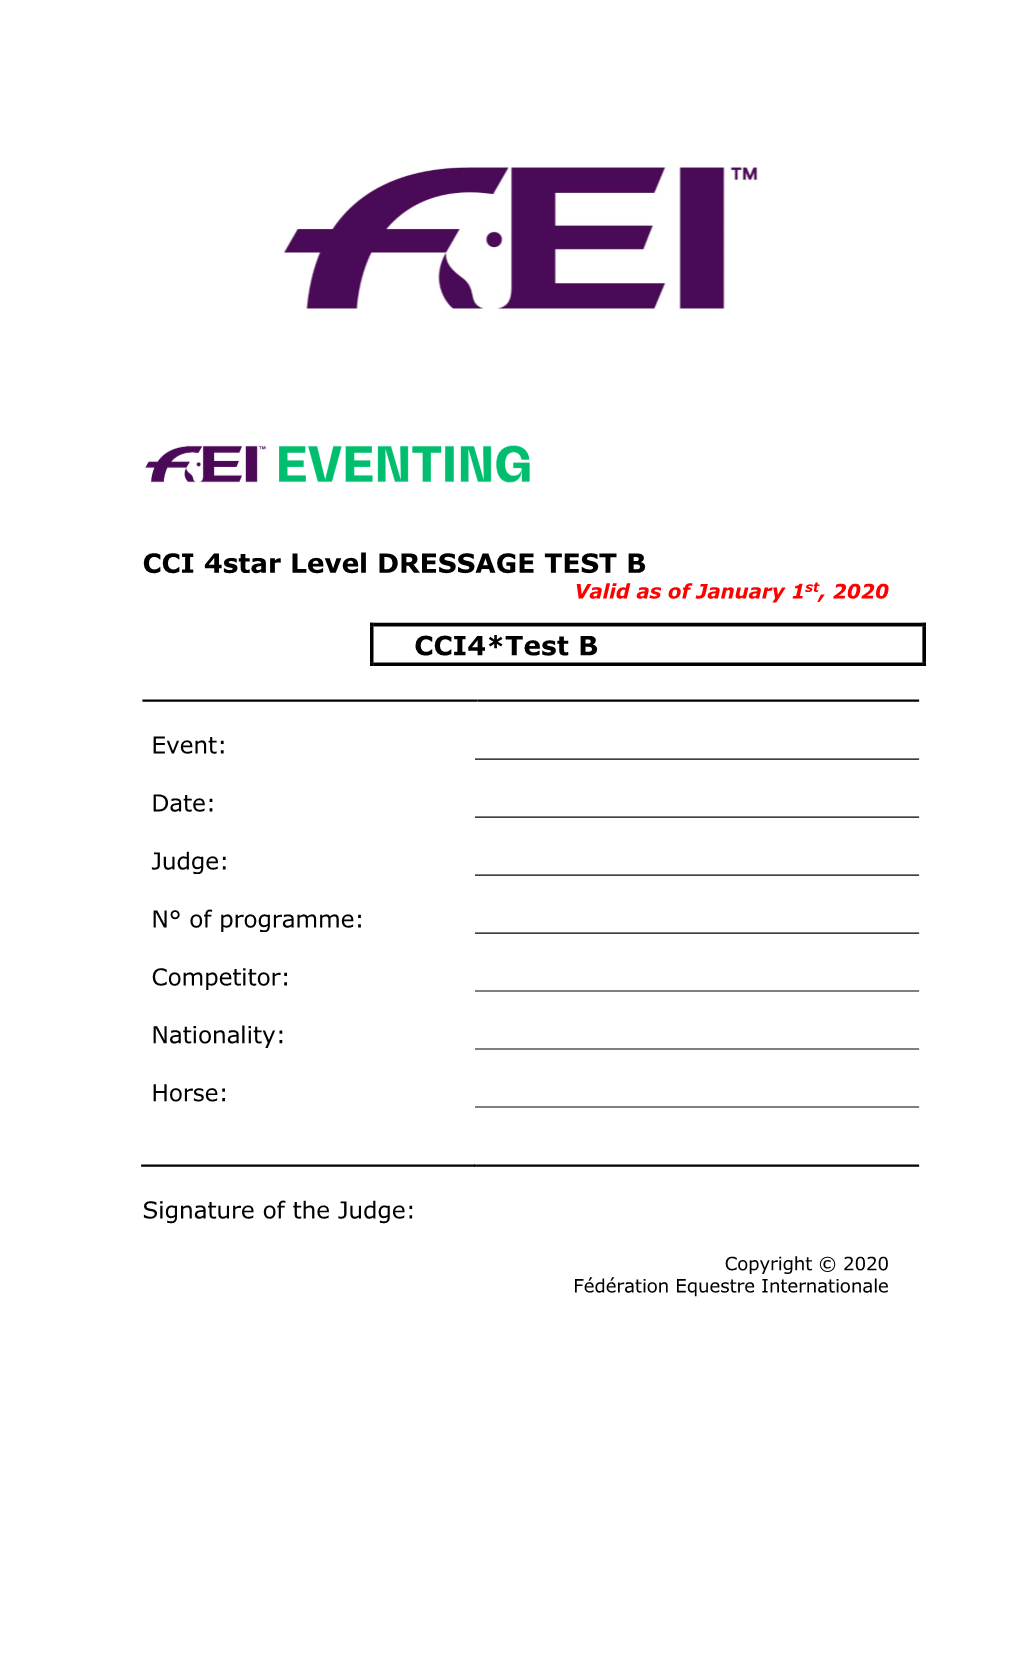 CCI 4Star Level DRESSAGE TEST B Valid As of January 1St, 2020